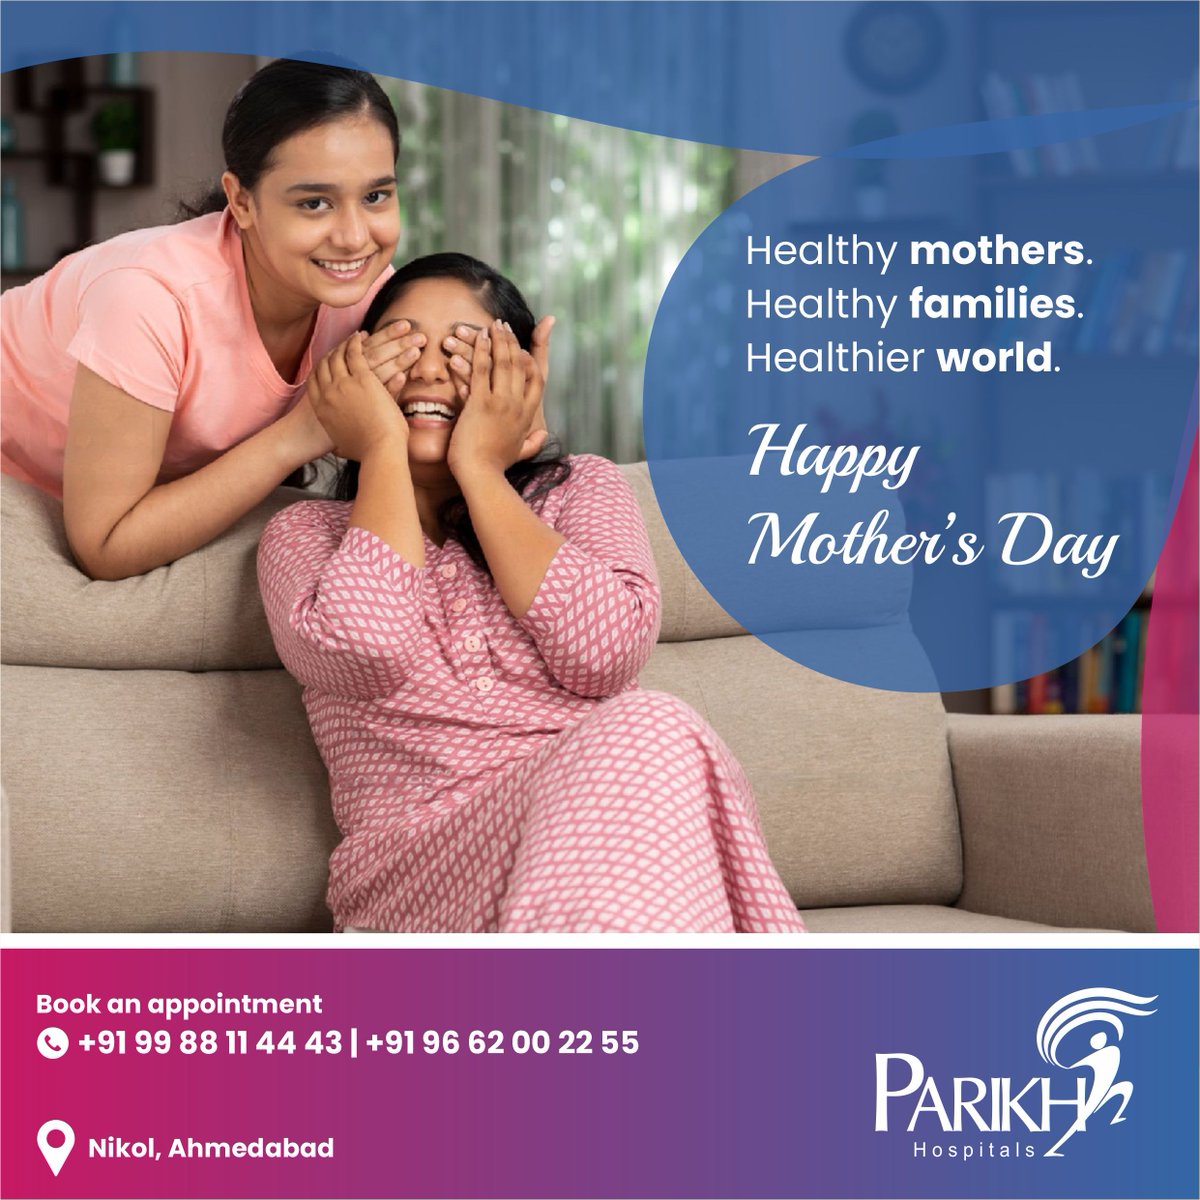 Happy Mother’s Day to celebrate the selfless dedication and nurturing role that mothers play in shaping the lives of their children and families. . . #ParikhHospitals #nikol #happymothersday2023 #mothersday2023 #mothersday #motherday #healthymothers #mothercare #momtobe #momcare